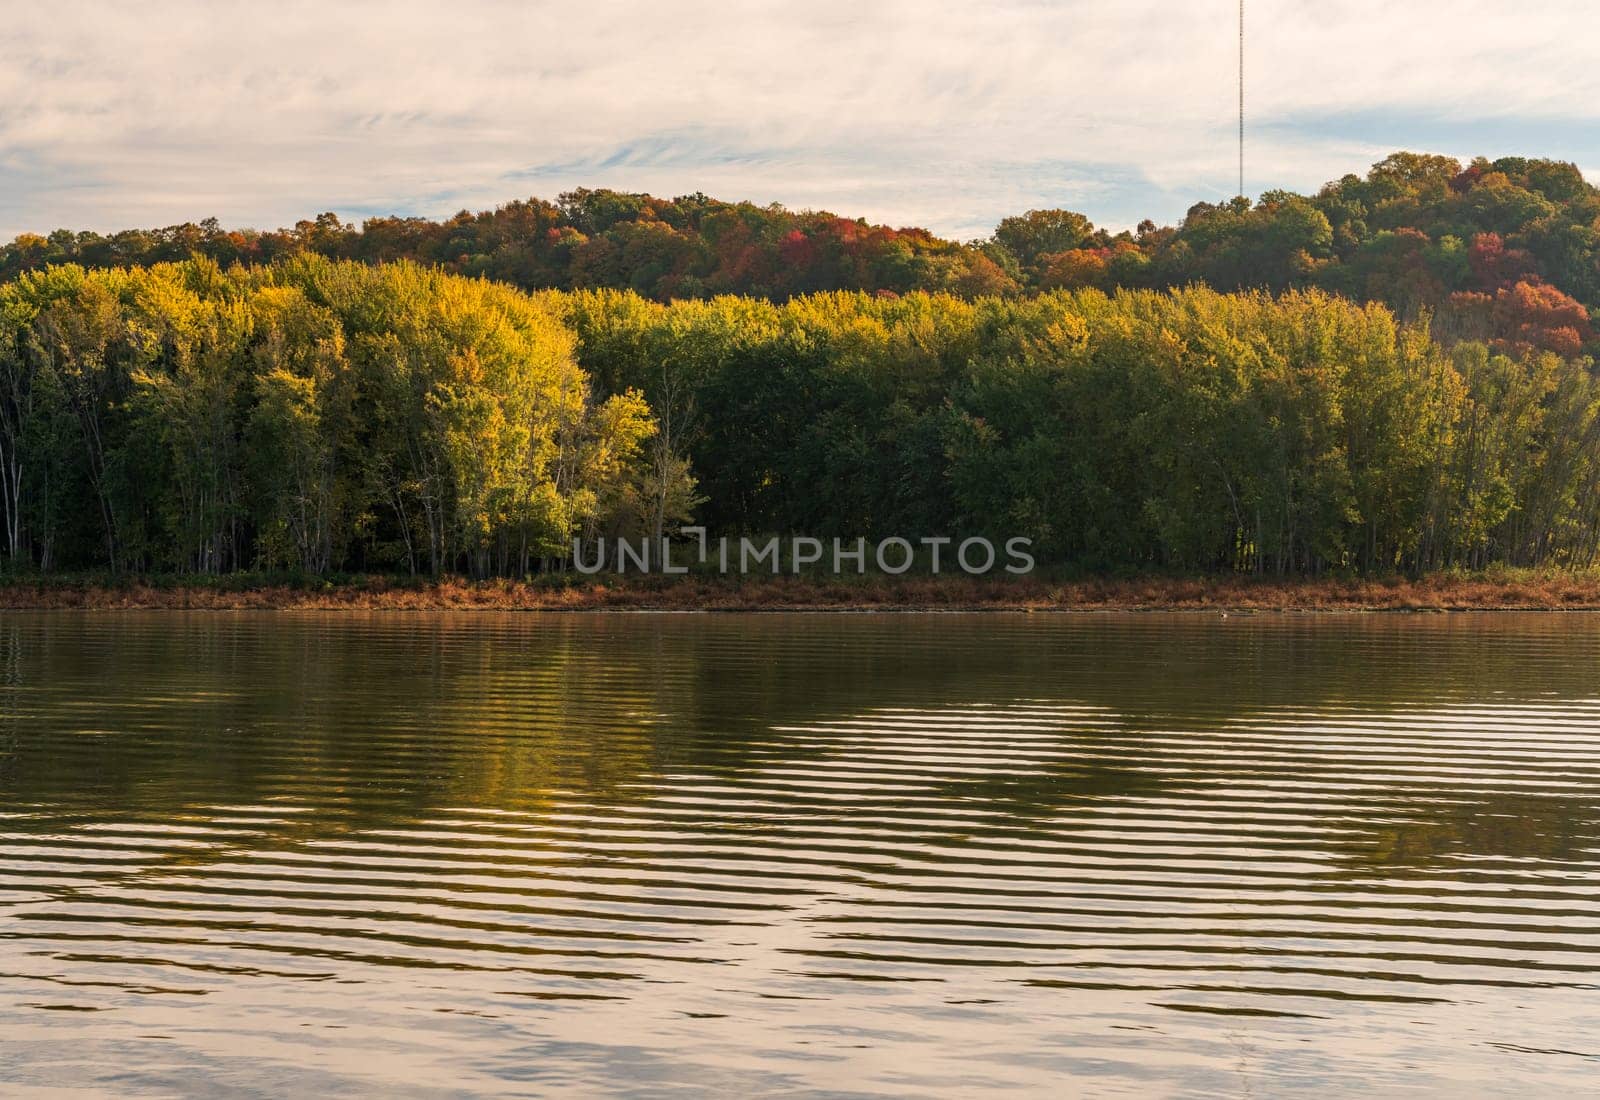 Ripples in calm surface of the Upper Mississippi reflecting fall colors near Dubuque Iowa